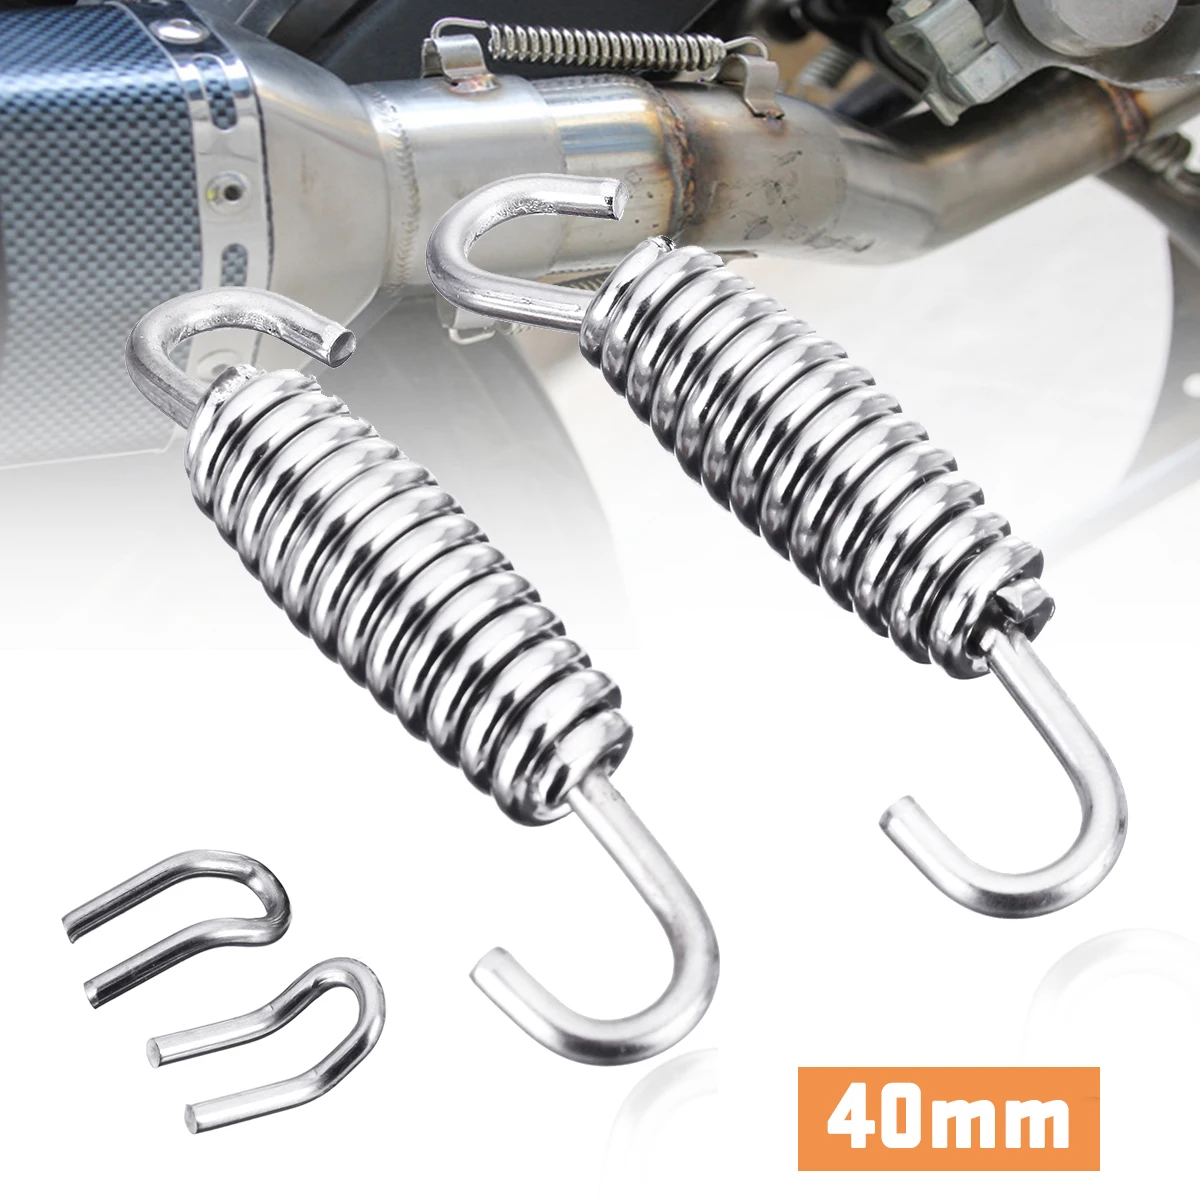 2 Piece 40mm Swivel End Motorcycle Exhaust Expansion Springs Stainless Steel 